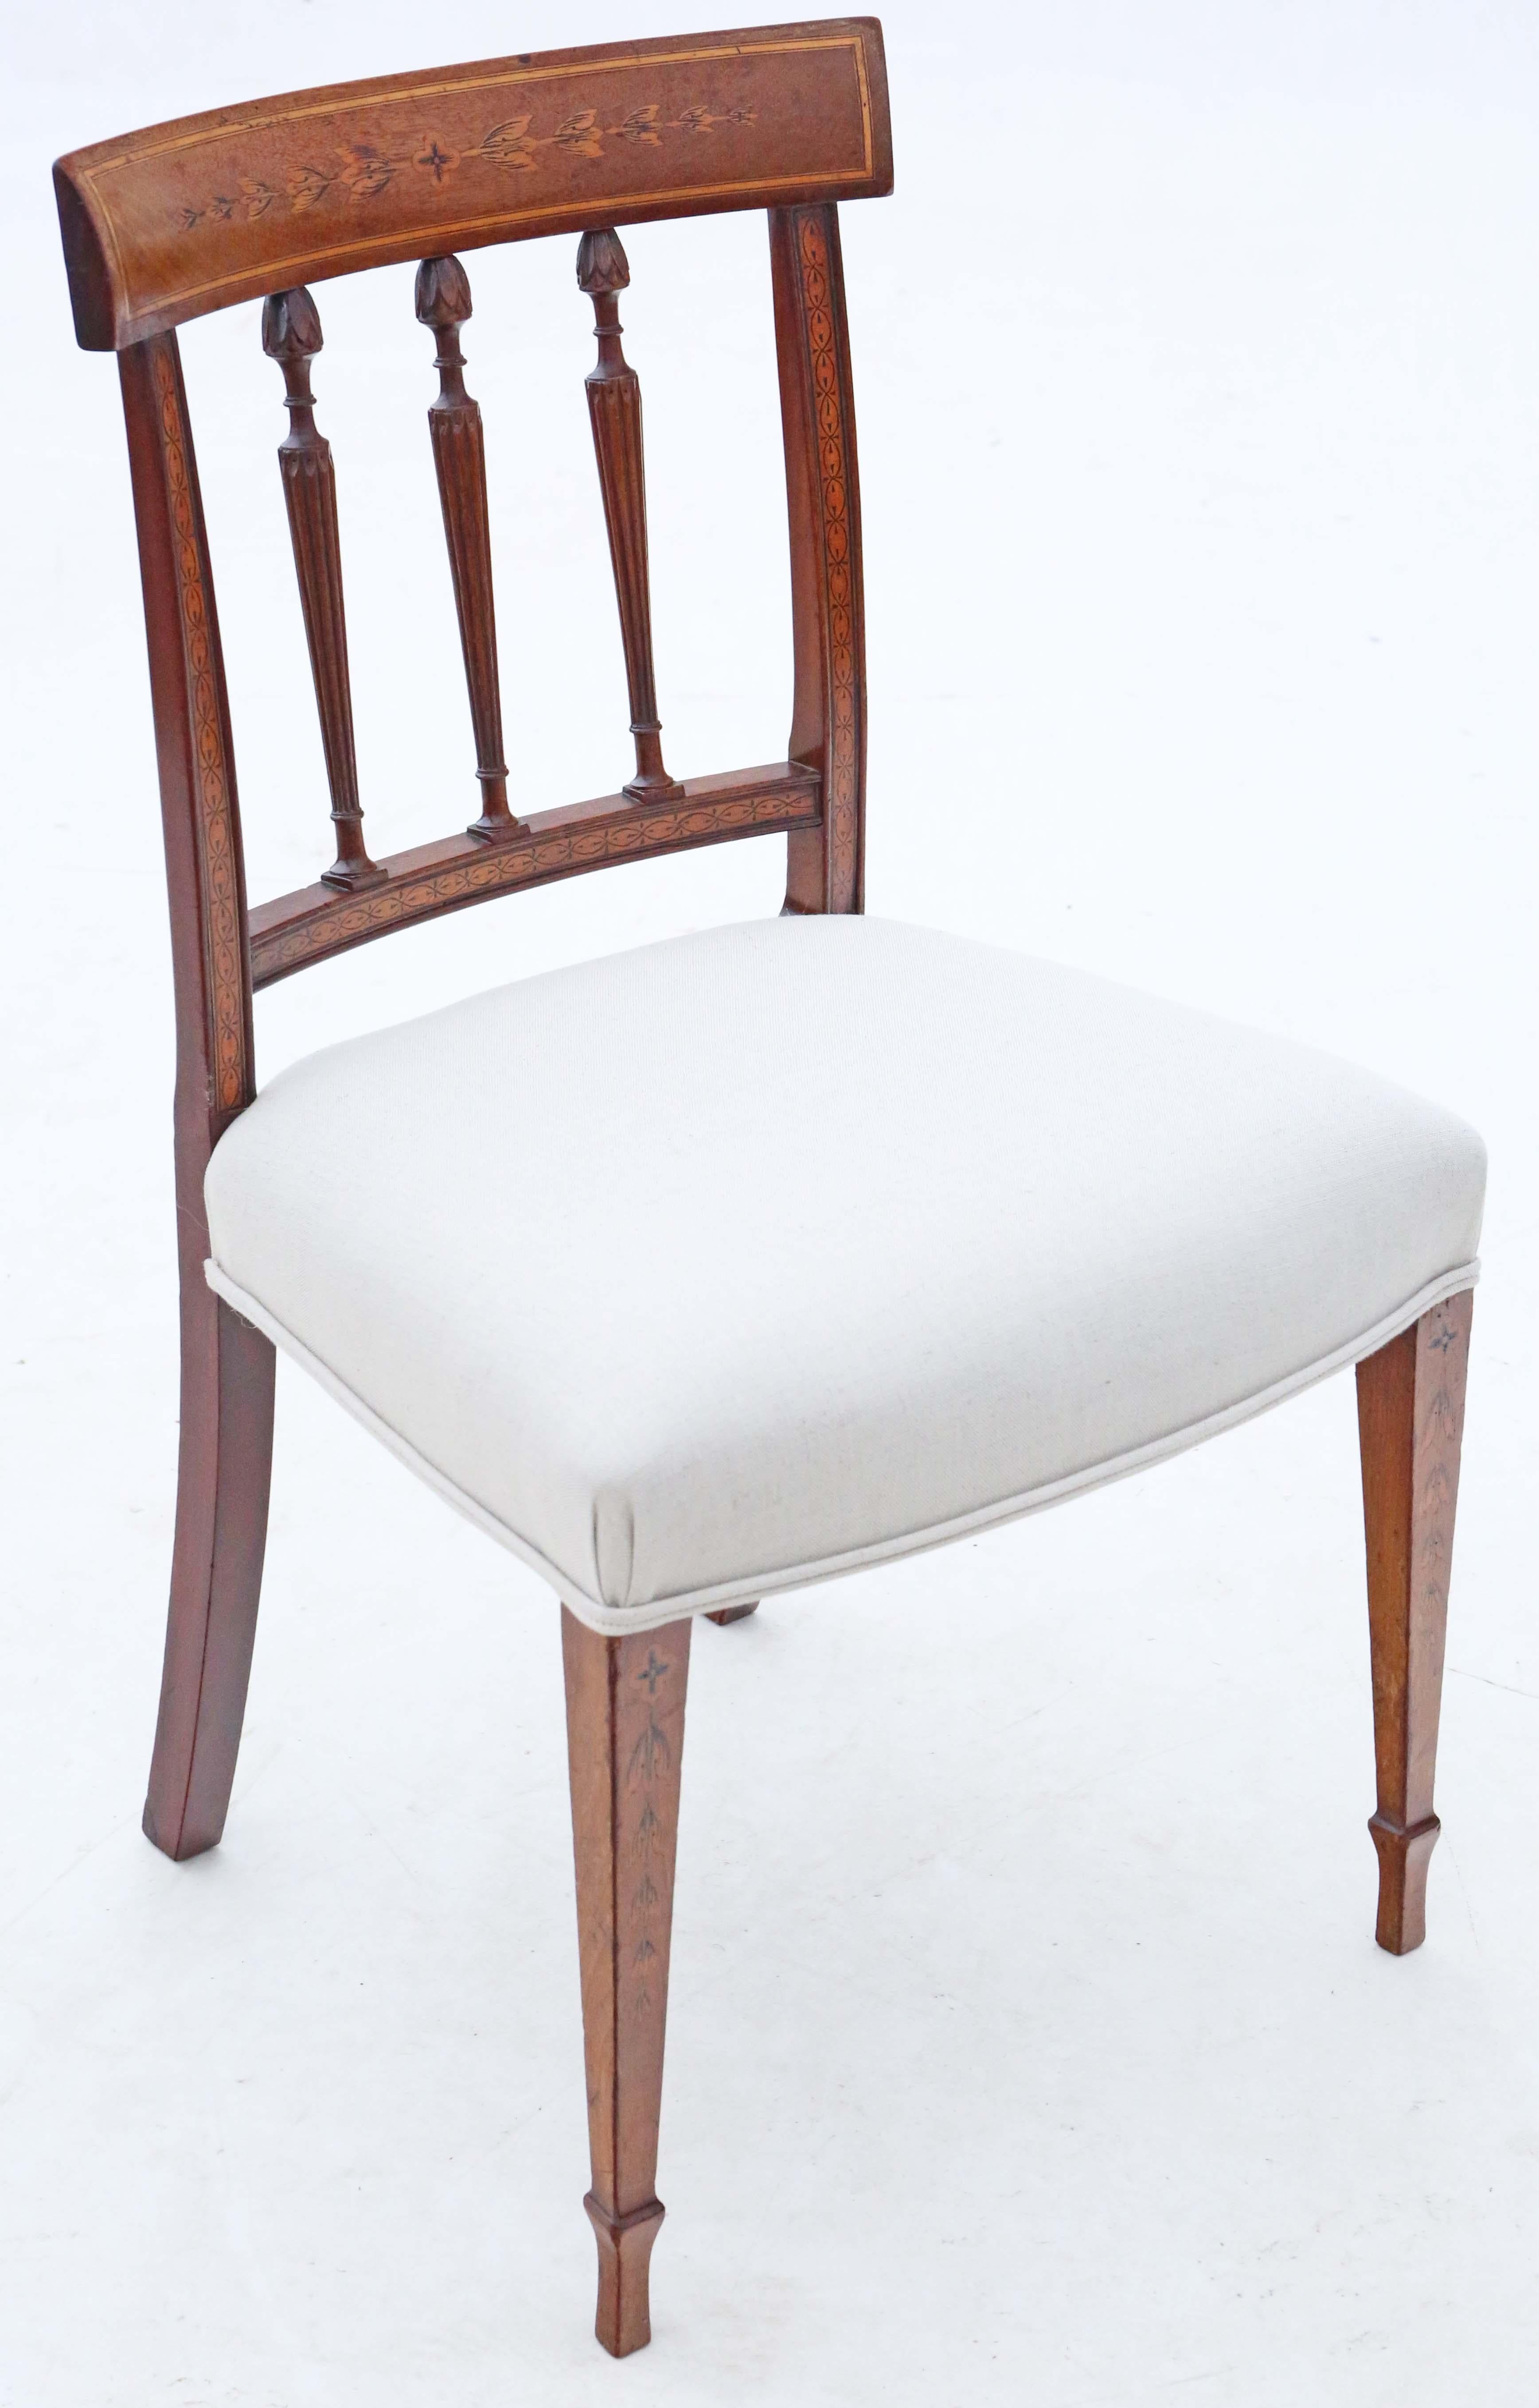 Wood Early 19th Century Mahogany Marquetry Dining Chairs: Set of 8, Antique Quality For Sale